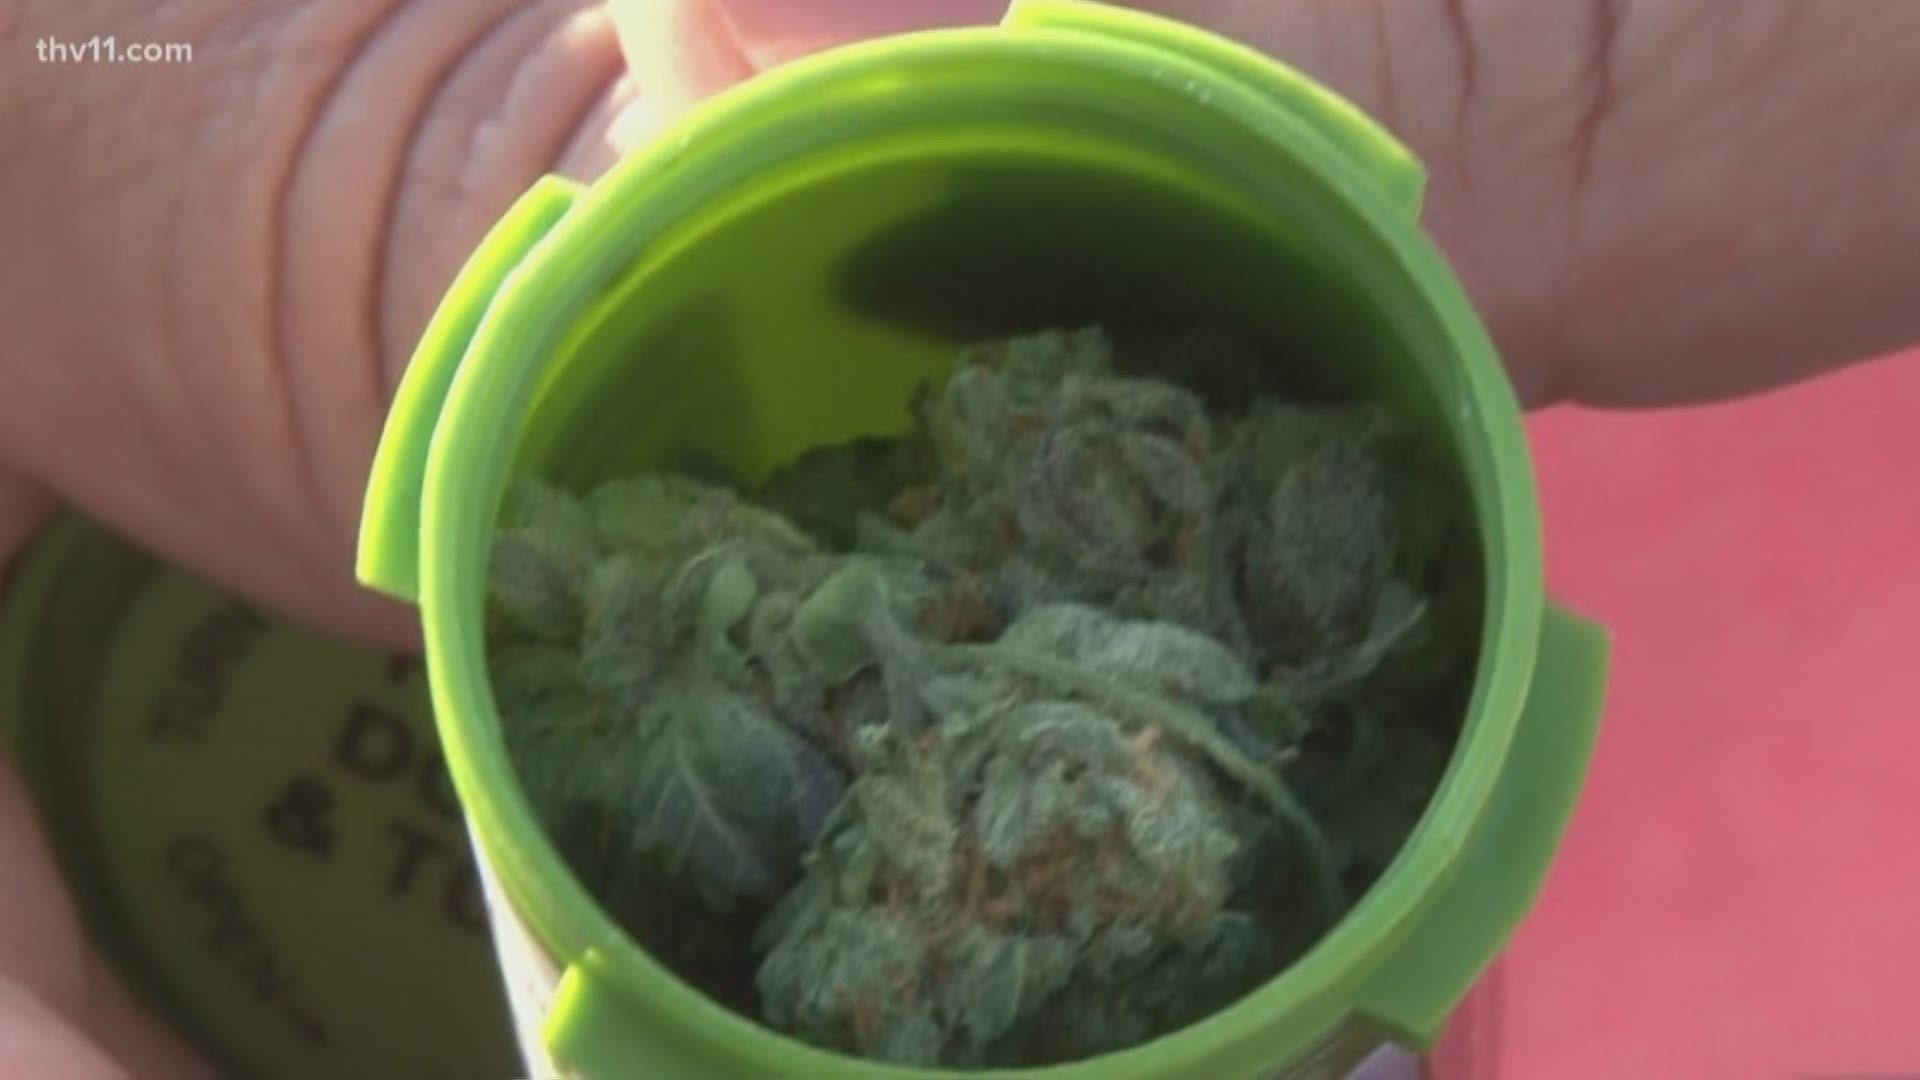 Medical marijuana has been on the market for just a few days in Arkansas and already hundreds have traveled to Hot Springs to get their hands on it.